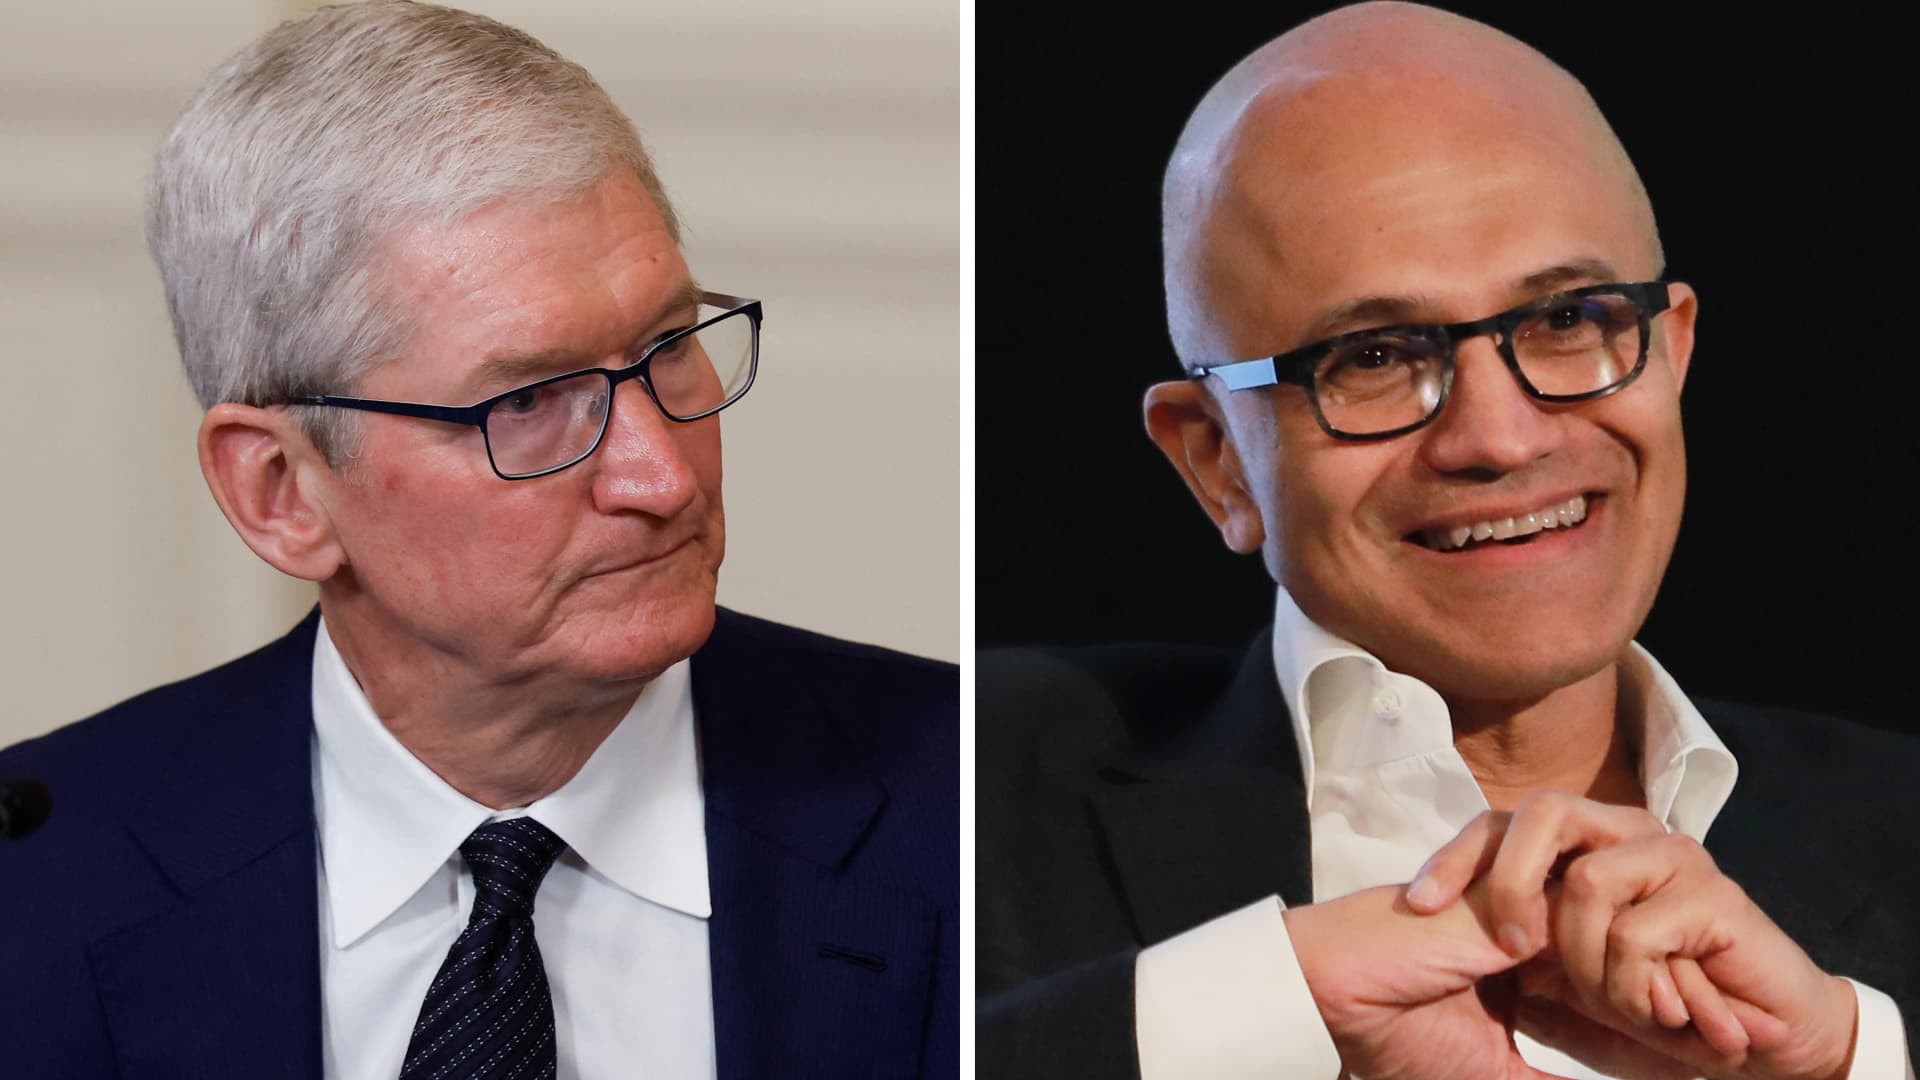 Microsoft leads Apple as the world's most valuable public company